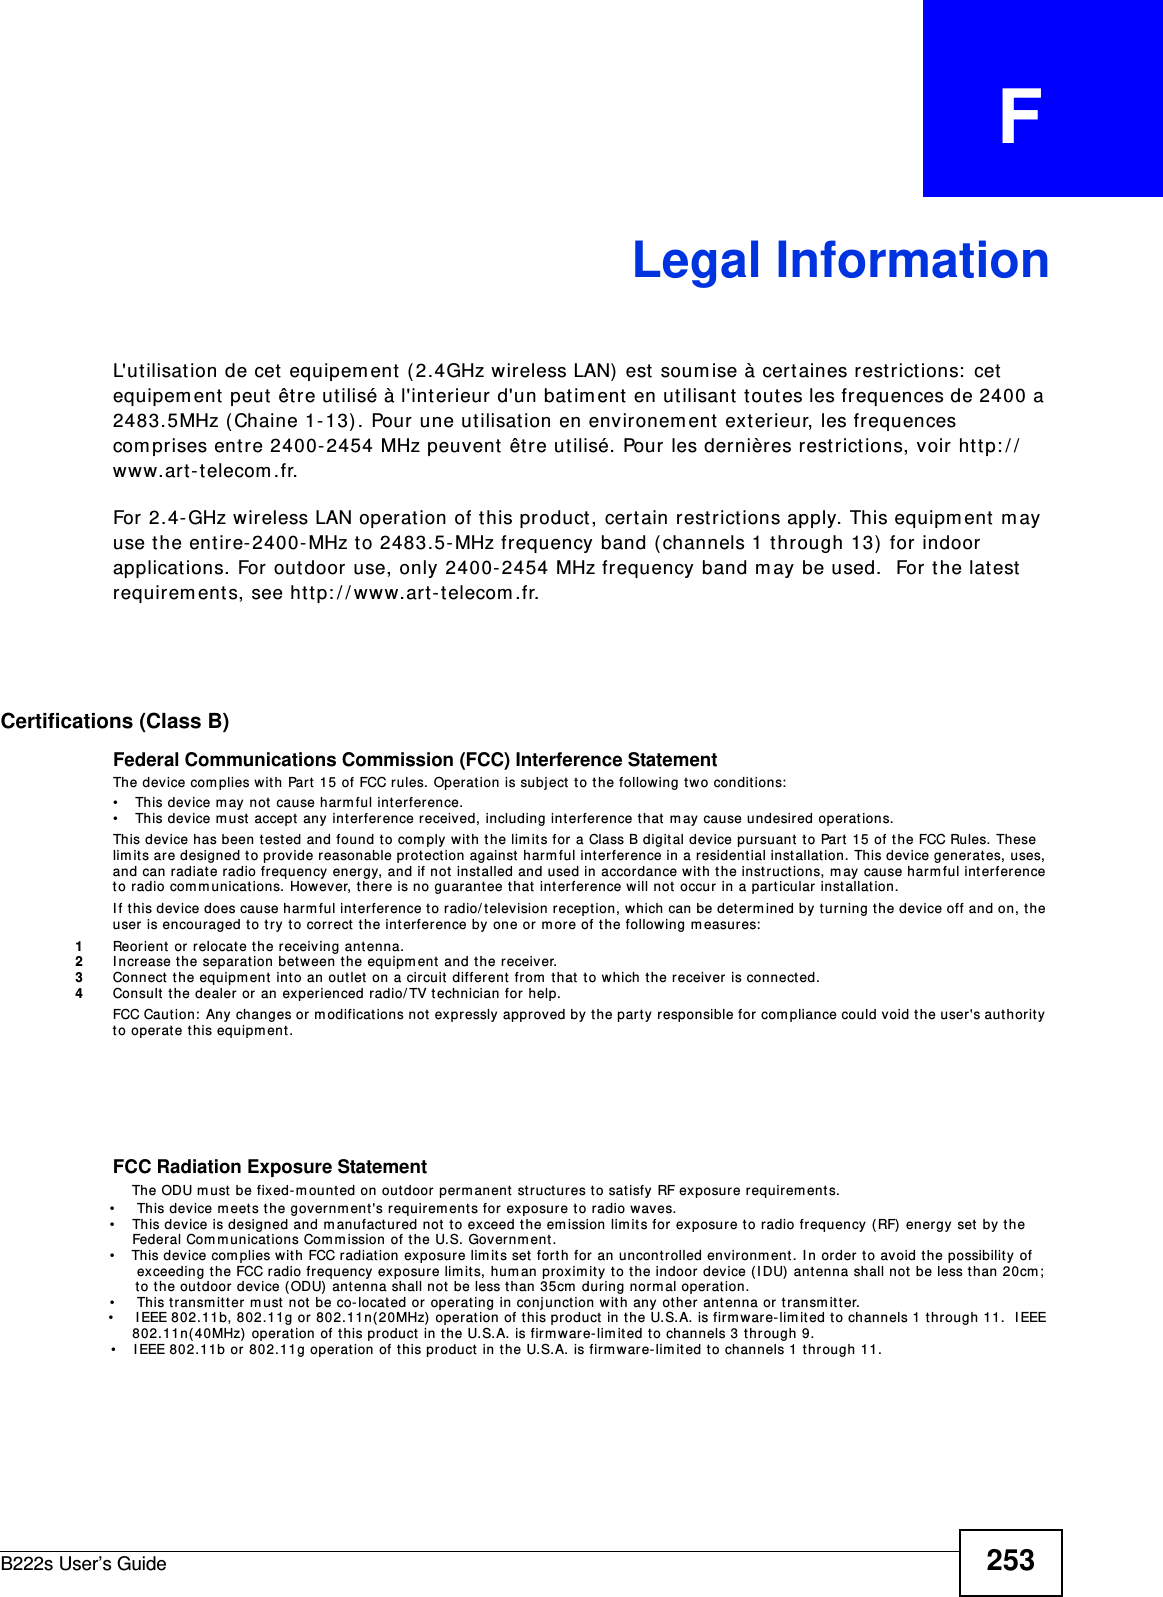 B222s User’s Guide 253APPENDIX   FLegal InformationL&apos;ut ilisation de cet  equipem ent  ( 2.4GHz wireless LAN)  est soum ise à cert aines restrict ions:  cet equipem ent peut  êt re ut ilisé à l&apos;int erieur d&apos;un batim ent en utilisant  t out es les frequences de 2400 a 2483.5MHz ( Chaine 1- 13) . Pour une utilisat ion en envir onem ent  ext er ieur, les frequences com prises ent r e 2400- 2454 MHz peuvent  êt r e ut ilisé. Pour les dernières restr ictions, voir ht t p: / /w ww. ar t - telecom .fr.For 2.4- GHz wireless LAN operat ion of t his product, certain rest rictions apply. This equipm ent  m ay use t he ent ire- 2400- MHz to 2483.5- MHz frequency band ( channels 1 t hrough 13)  for indoor applications. For out door use, only 2400- 2454 MHz frequency band m ay be used.  For t he lat est  requirem ent s, see ht t p: / / www.art- t elecom .fr. Certifications (Class B)Federal Communications Commission (FCC) Interference StatementThe device com plies with Part 15 of FCC rules. Operat ion is subj ect t o t he following t w o conditions:• This device m ay not  cause harm ful int erfer ence.• This device m ust  accept any int erfer ence r eceived, including int erference that  m ay cause undesired operat ions.This device has been t est ed and found t o com ply with t he lim its for a Class B digital device pursuant  to Part  15 of t he FCC Rules.  These lim its ar e designed t o provide reasonable prot ection against  h arm ful int erference in a resident ial installat ion. This dev ice generat es, uses,  and can radiat e radio frequency energy, and if not installed and used in accor dance wit h the inst ruct ions, m ay cause harm ful int erference to radio com m u nicat ions.  However, t here is no guarant ee t hat  interfer ence will not  occur  in a part icular inst allat ion.I f t his device does cause harm ful interference t o radio/ television recept ion, w hich can be determ ined by t urning the device off and on, t he user  is encouraged t o try to correct  the interference by one or m ore of t he following m easures:1Reorient  or r elocat e t he receiving antenna.2I ncrease t he separation between t he equipm ent  and t he r eceiver.3Connect  t he equipm ent  int o an out let on a circuit  different  from  that  to which t he receiver is connected.4Consult t he dealer or an experienced radio/ TV t echnician for help.FCC Caution:  Any changes or m odificat ions not ex pressly  approved by the part y responsible for com pliance could void t he user&apos;s aut hority to operat e t his equipm ent . FCC Radiation Exposure Statement    The ODU m ust  be fixed-m ount ed on out door  per m anent  struct ures t o sat isfy  RF exposure requirem ent s.                         • This device m eet s the governm ent&apos;s requirem ent s for exposur e t o radio wav es.                       • This device is designed and m anufactured not  t o exceed the emission lim it s for exposure to radio frequency (RF)  energy set by the                        Federal Com municat ions Com m ission of t he U.S. Governm ent .                       •    This device com plies w it h FCC radiat ion exposur e lim it s set  fort h for an uncont rolled envir onm ent . I n order t o avoid t he possibility of                        exceeding the FCC radio fr equency exposure lim its, hum an proxim ity t o t he indoor device ( I DU)  ant enna shall not be less than 20cm ;                          t o t he out door device (ODU)  ant enna shall not  be less t han 35cm  during nor m al oper at ion.                       • This t ransm it t er m ust not  be co- locat ed or operating in conj unct ion w it h any ot her ant enna or t ransm it t er.                         • I EEE 802.11b, 802.11g or 802.11n(20MHz)  operation of this product  in t he U.S.A. is firm ware-lim it ed t o channels 1 t hr ough 11.  I EEE                        802.11n( 40MHz)  operation of t his pr oduct in t he U.S.A. is firm ware-lim it ed t o channels 3 t hrough 9.                            • I EEE 802.11b or 802.11g operation of t his product  in t he U.S.A.  is firm war e-lim it ed t o channels 1  t hr ough 11.